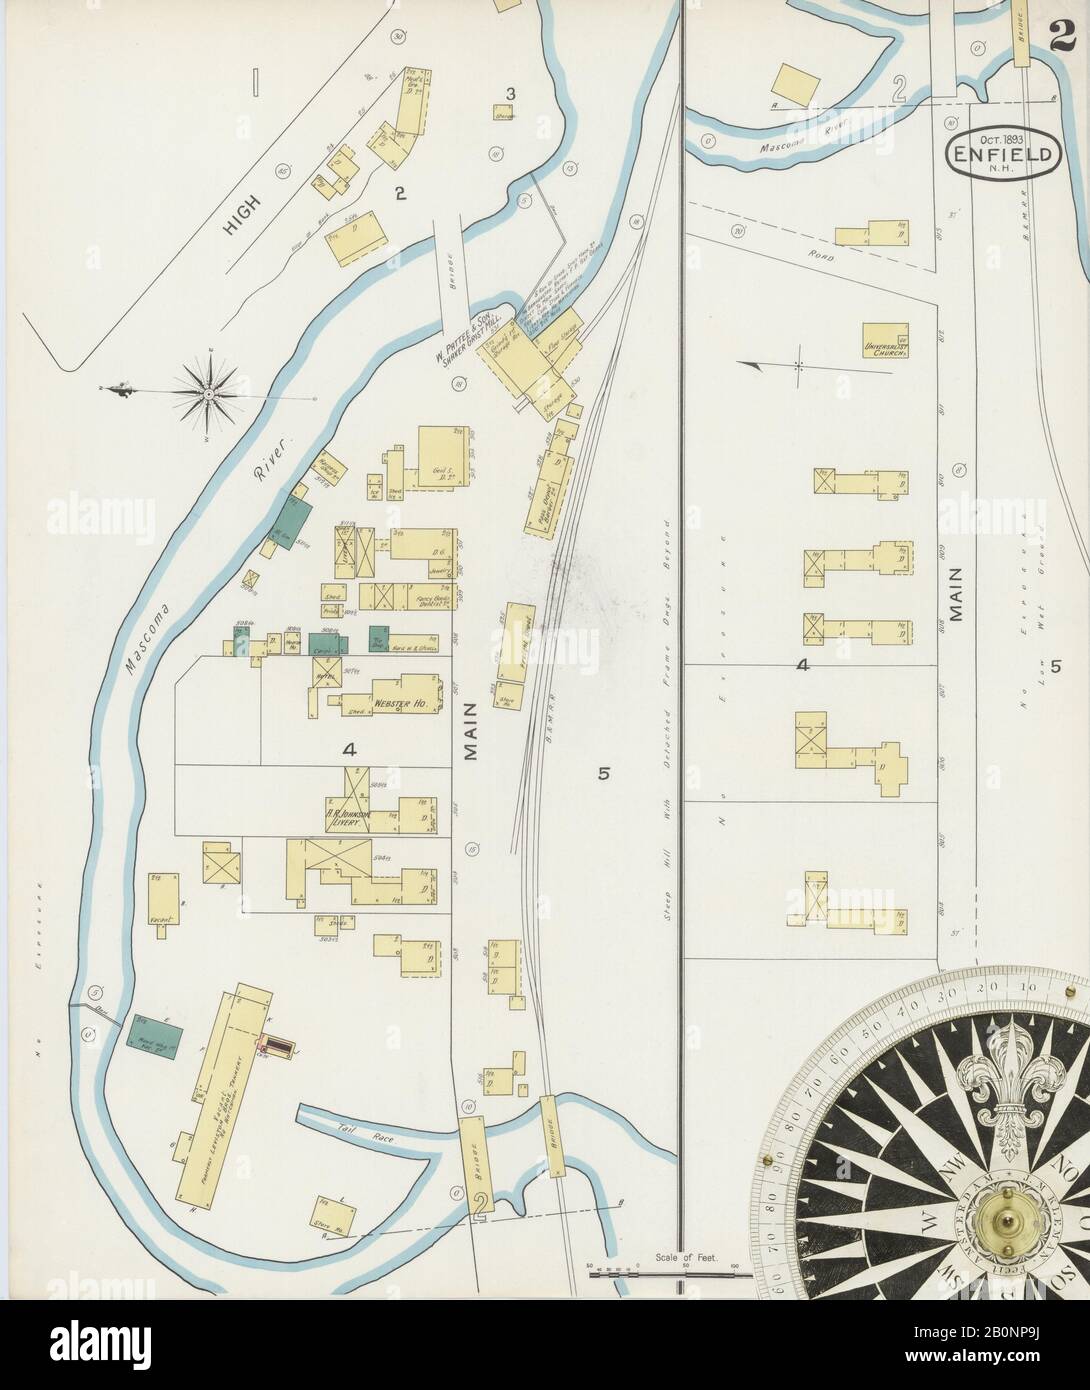 Image 2 of Sanborn Fire Insurance Map from Enfield, Grafton County, New Hampshire. Oct 1893. 3 Sheet(s), America, street map with a Nineteenth Century compass Stock Photo